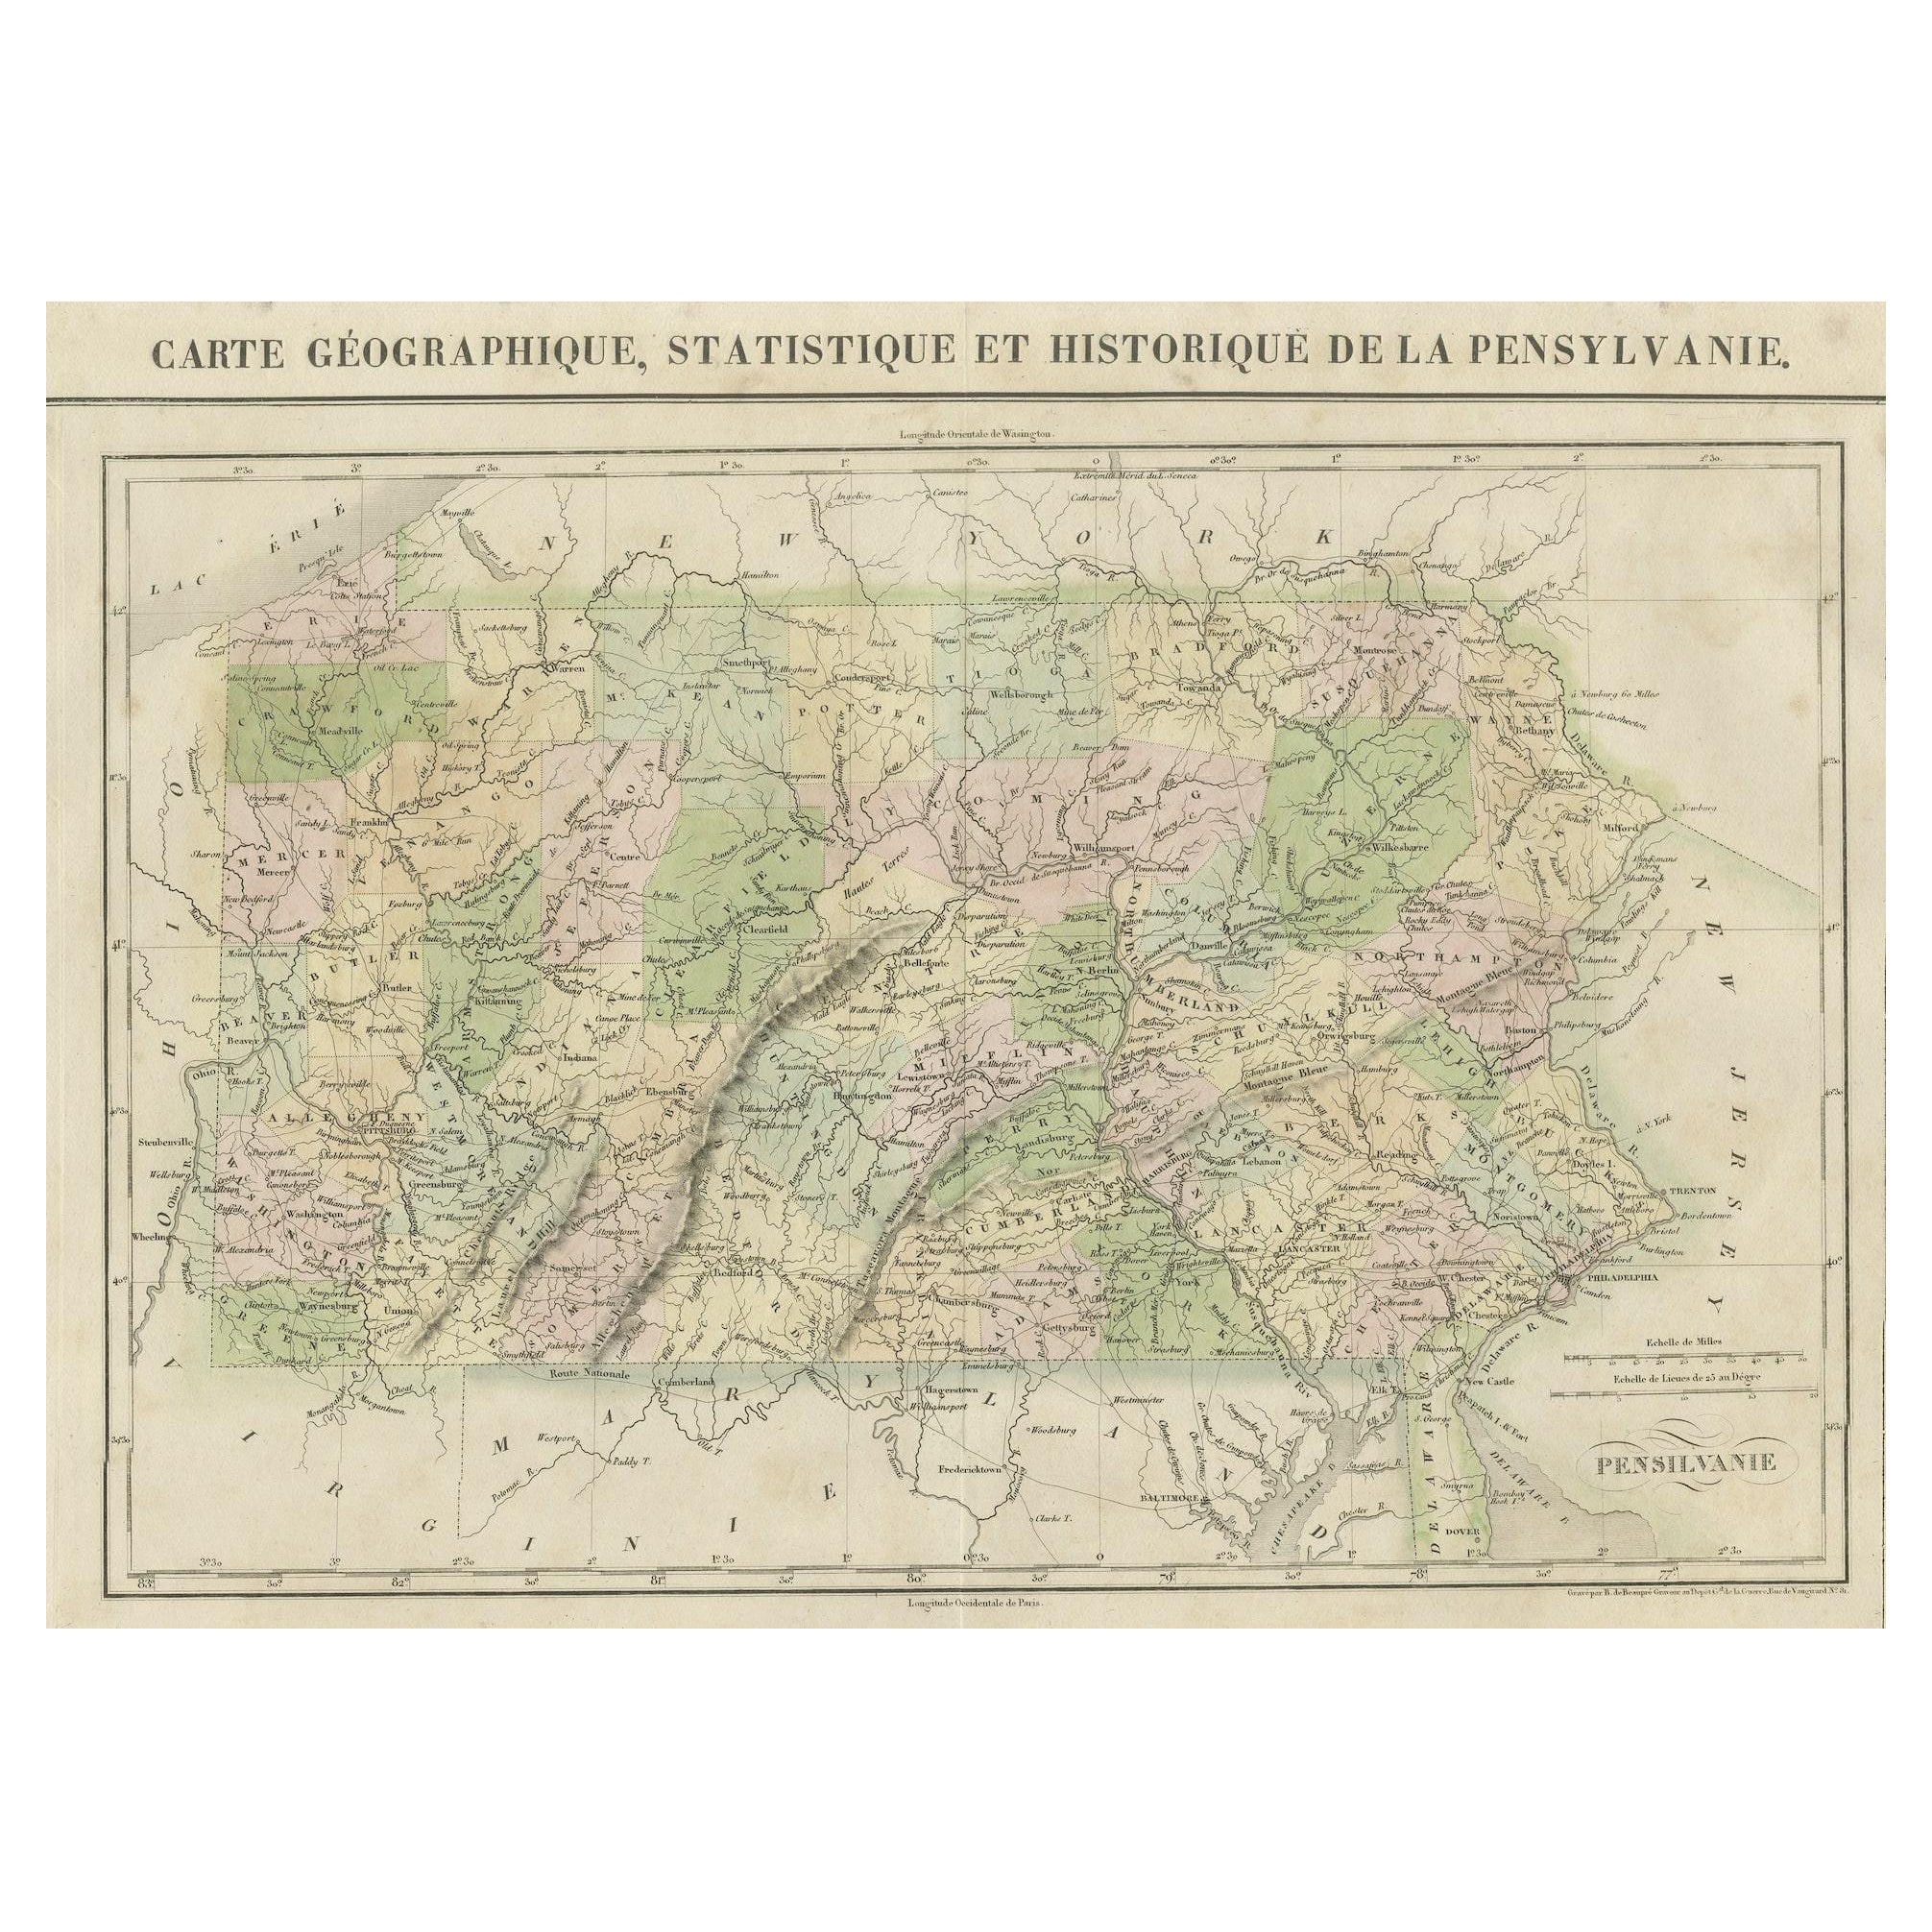 French Geographical, Statistical and Historical Map of Pensylvania, 1825